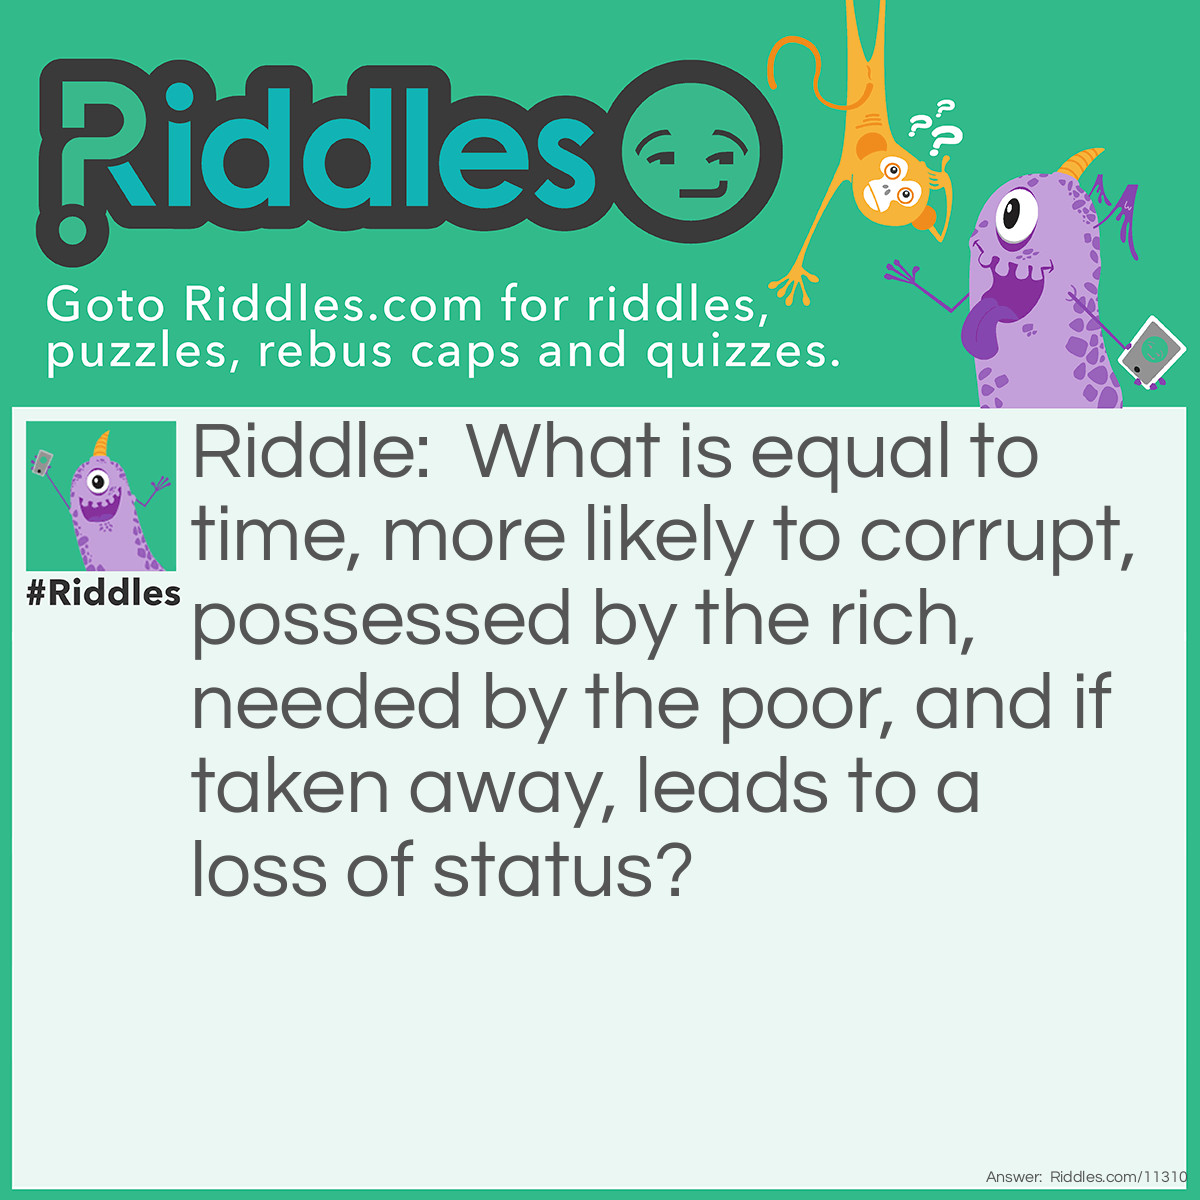 Riddle: What is equal to time, more likely to corrupt, possessed by the rich, needed by the poor, and if taken away, leads to a loss of status? Answer: Money.